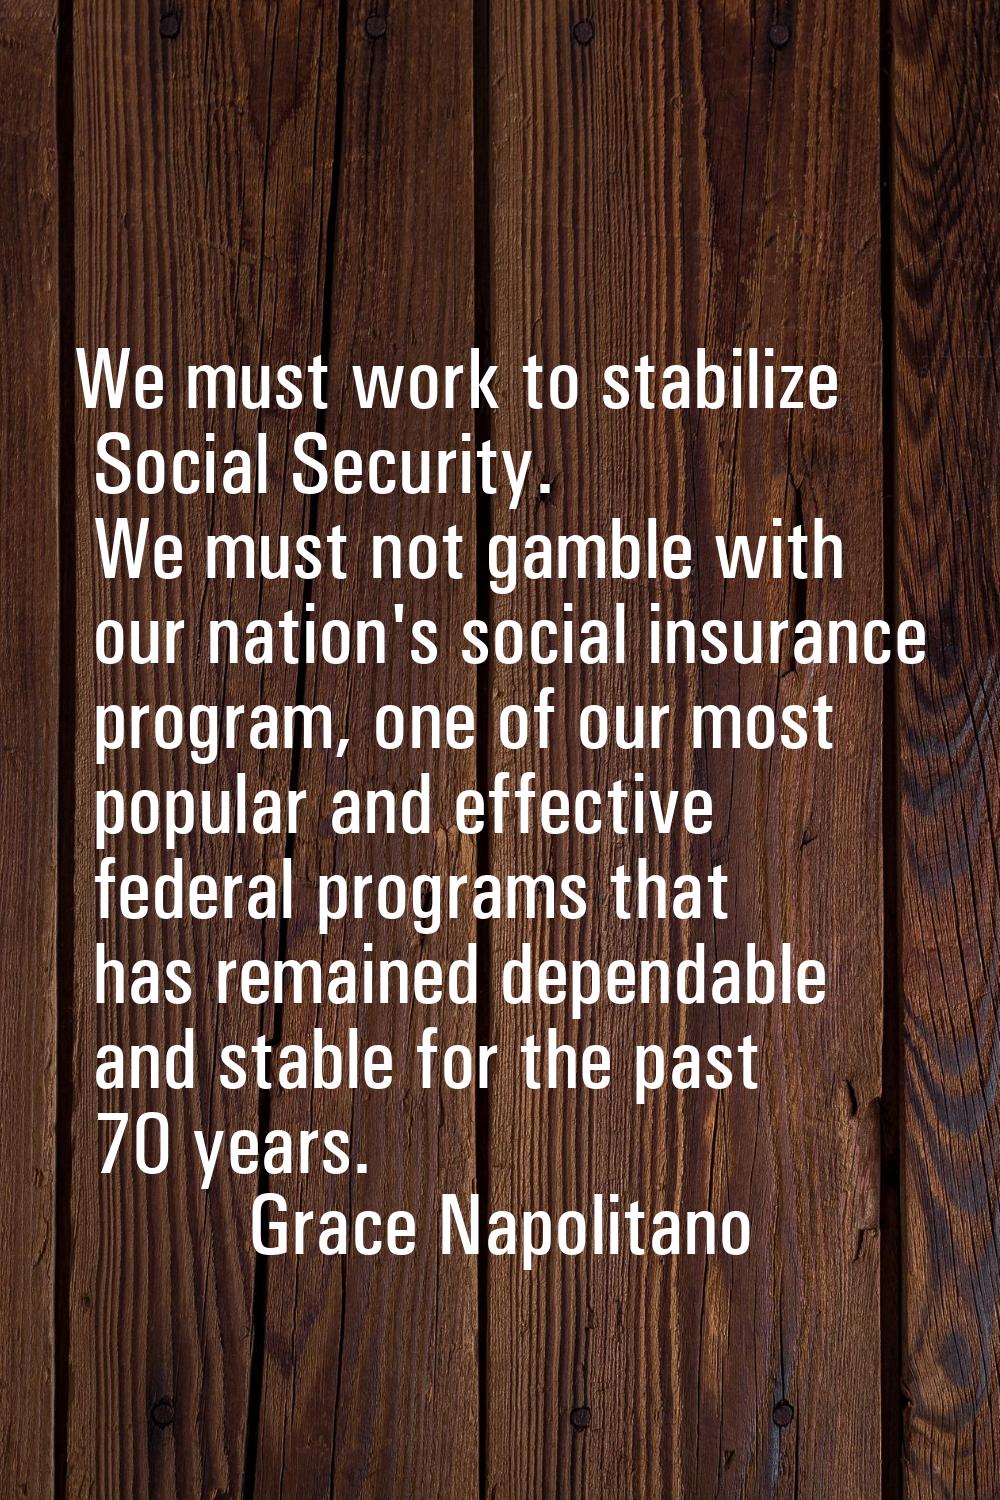 We must work to stabilize Social Security. We must not gamble with our nation's social insurance pr